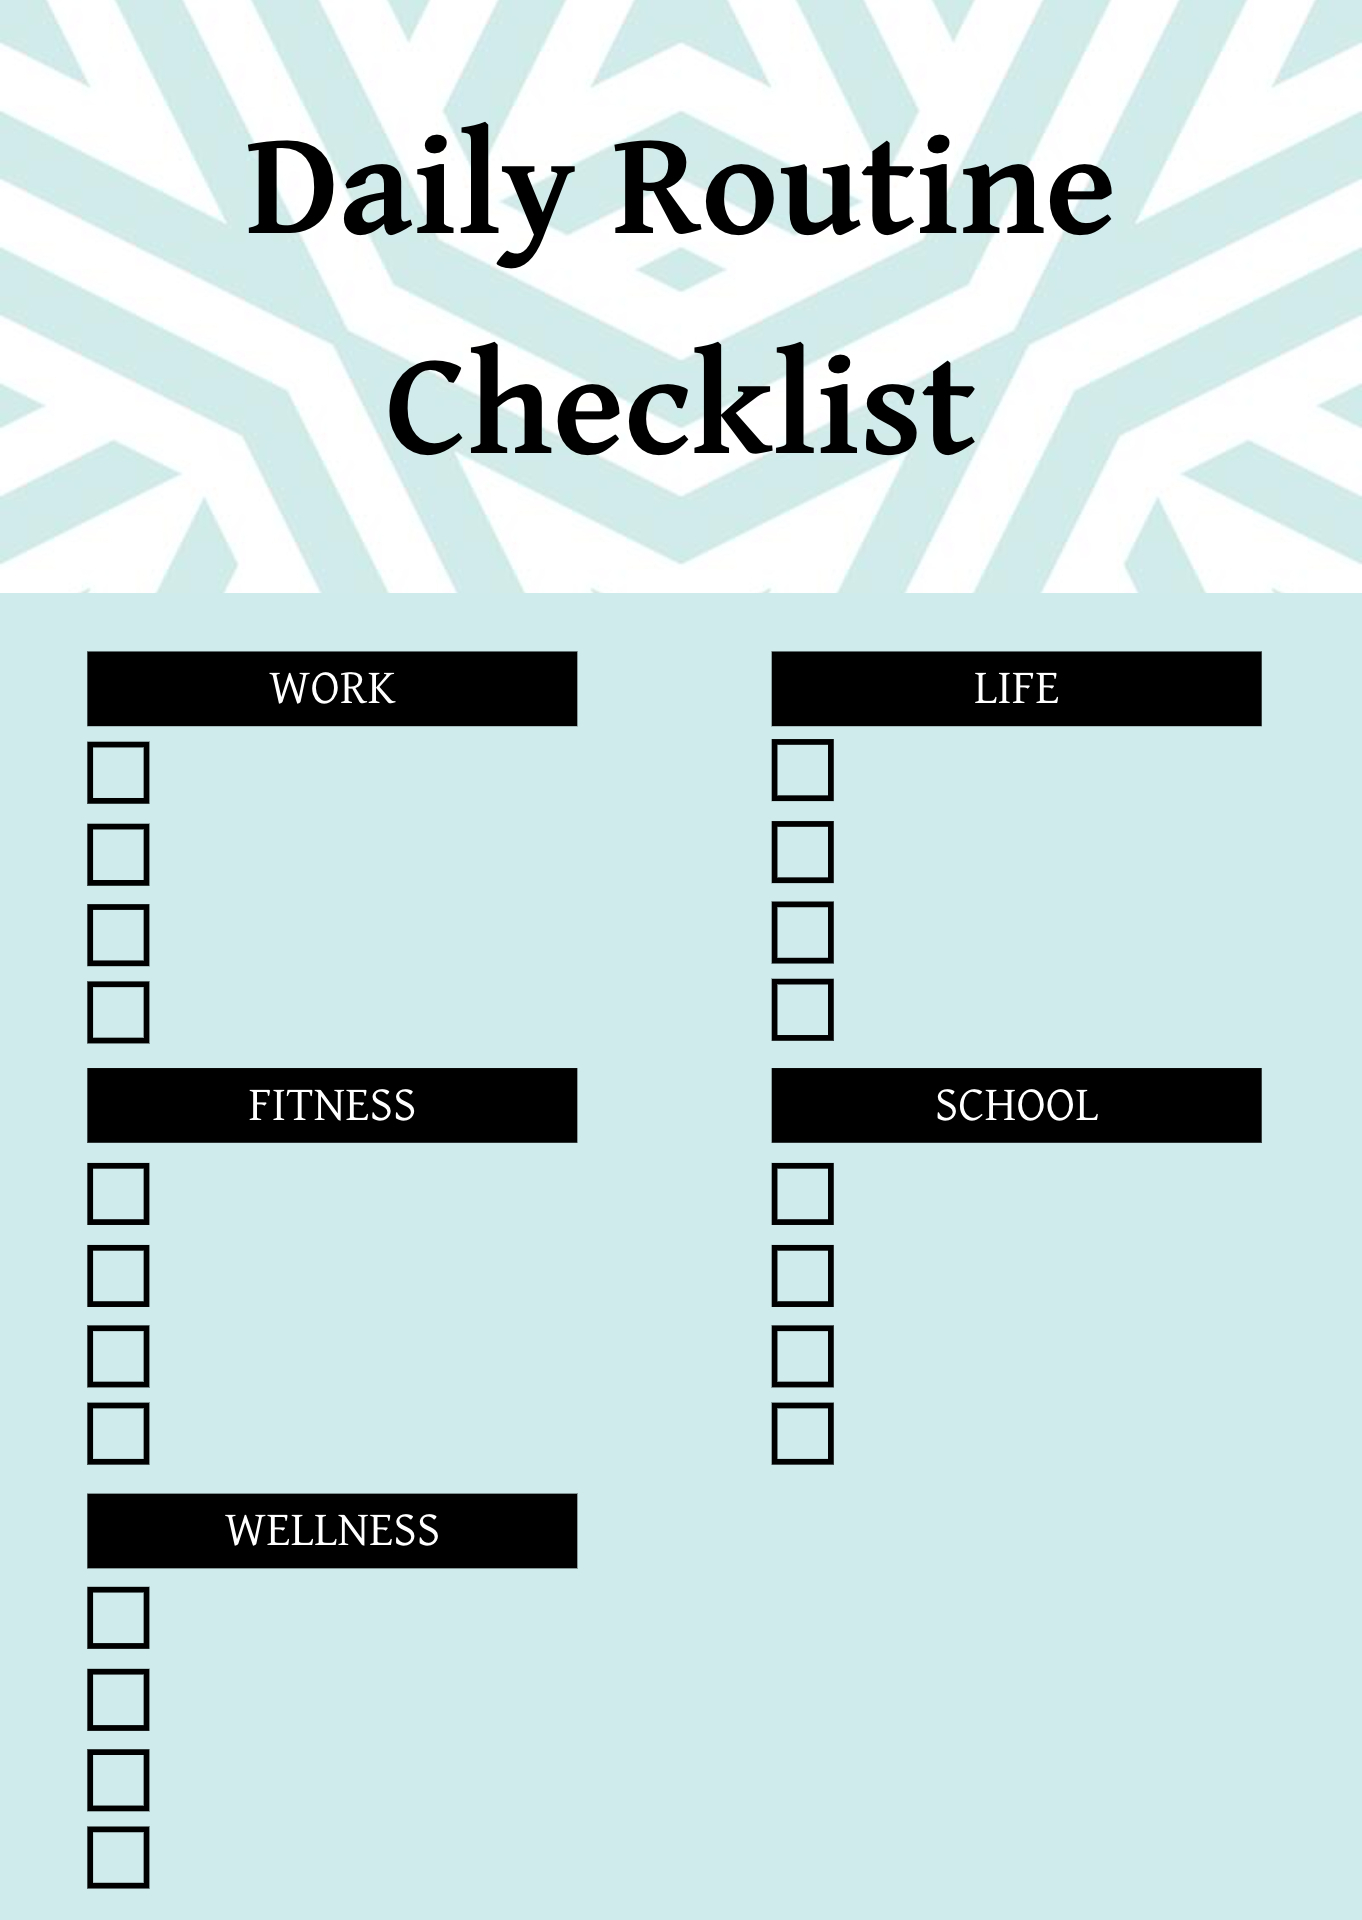 free-printable-daily-routine-checklist-template-daily-routine-planner